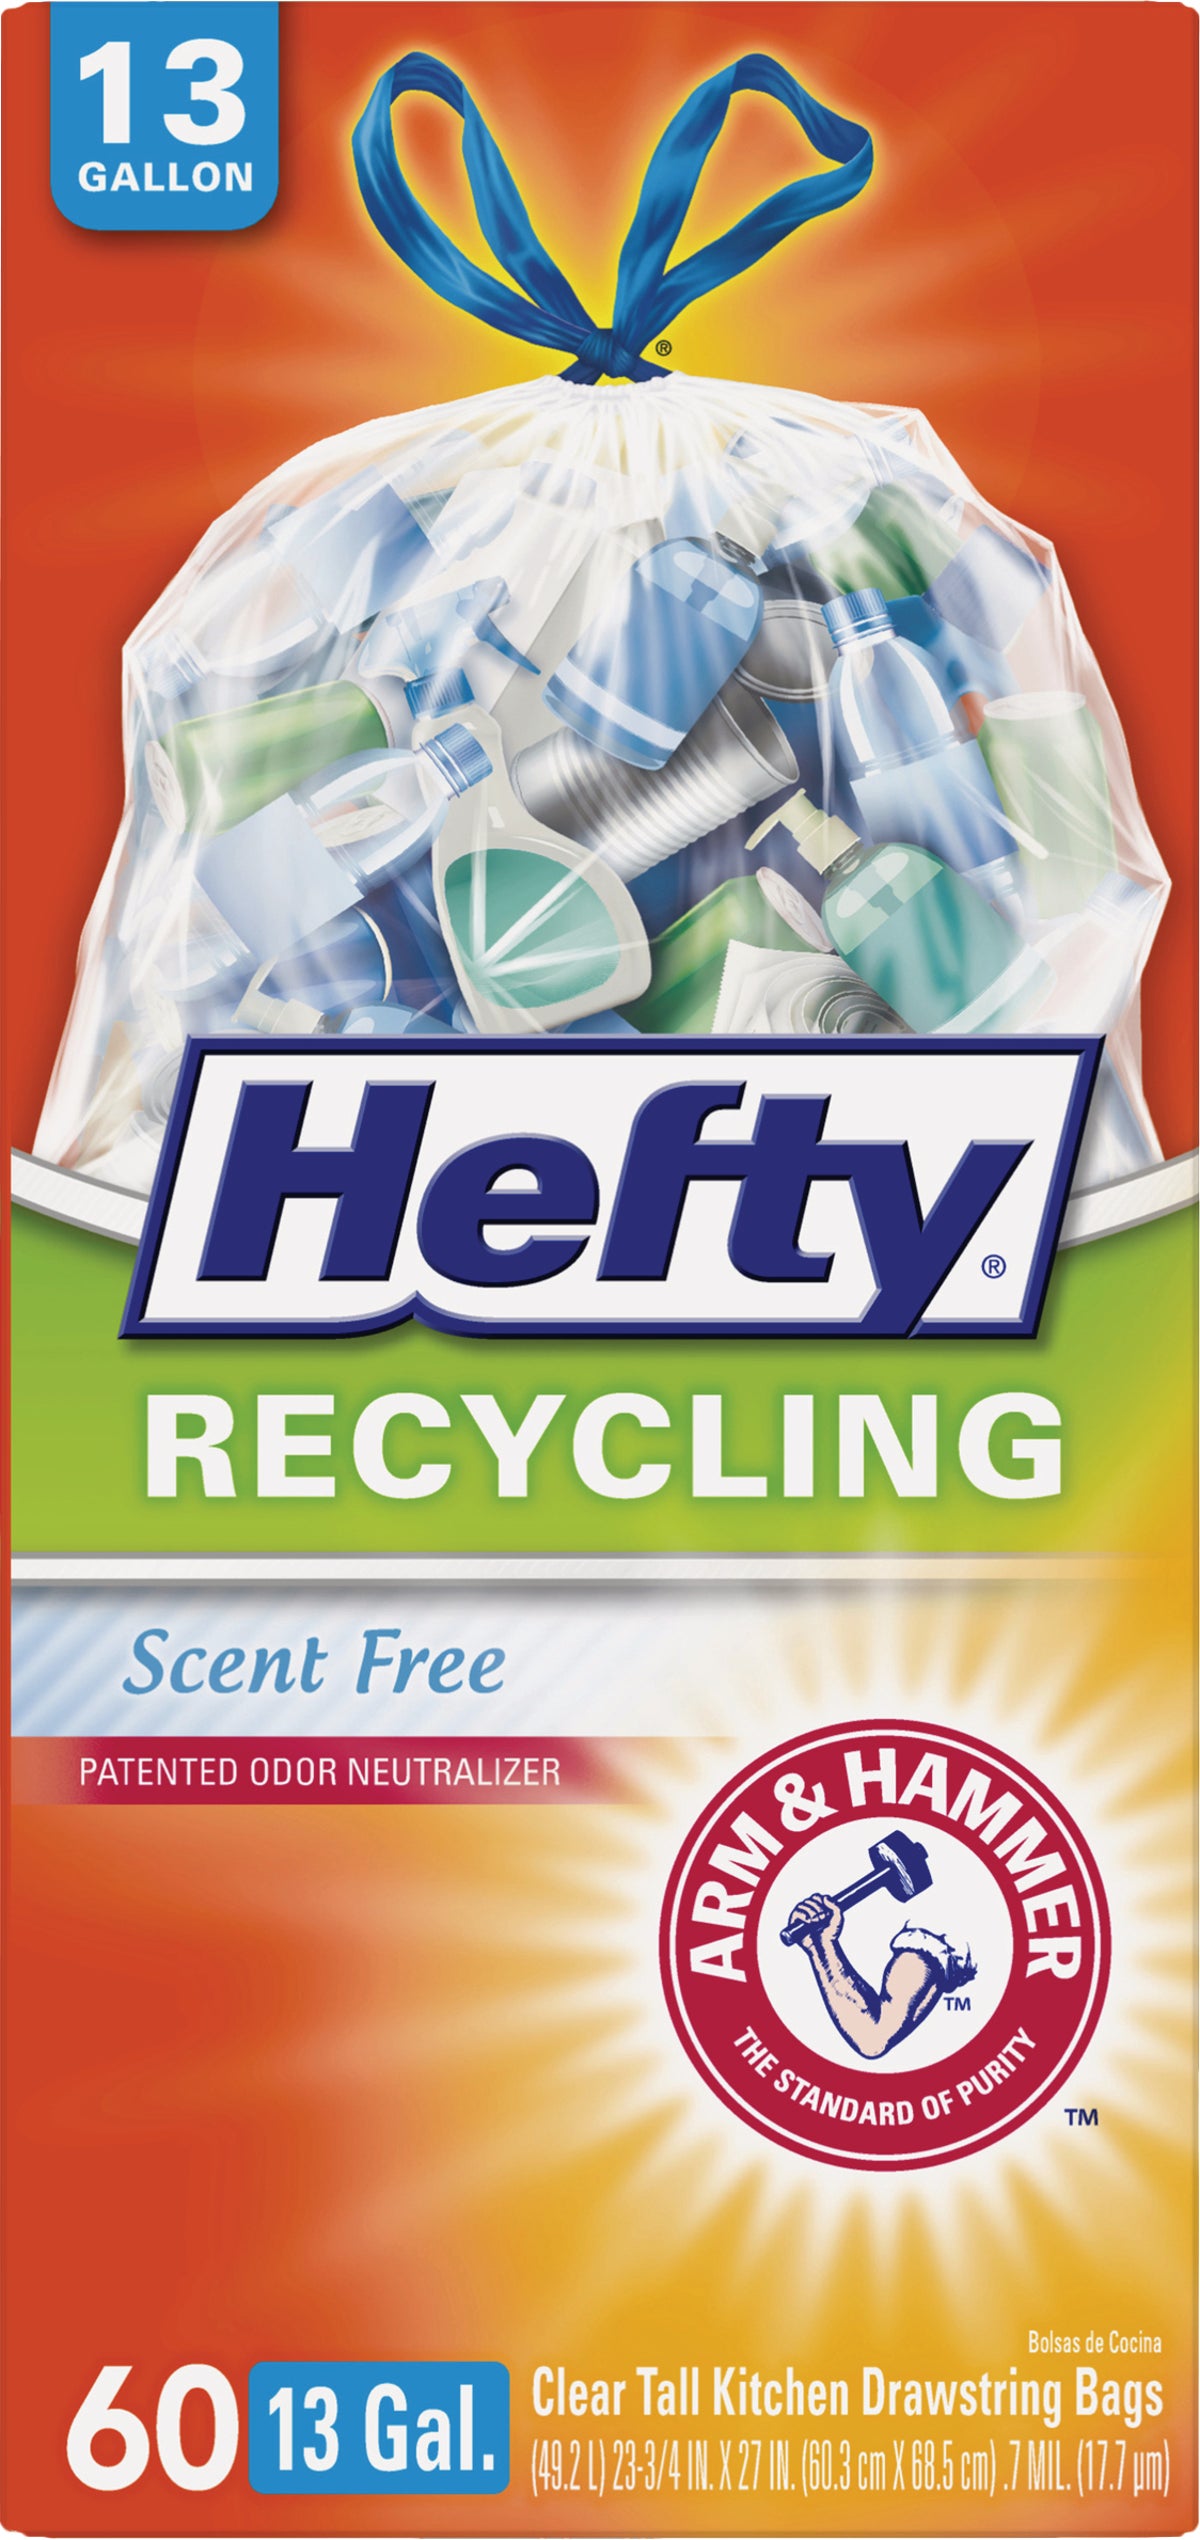 Hefty Recycle Bag 13 Gal., Clear